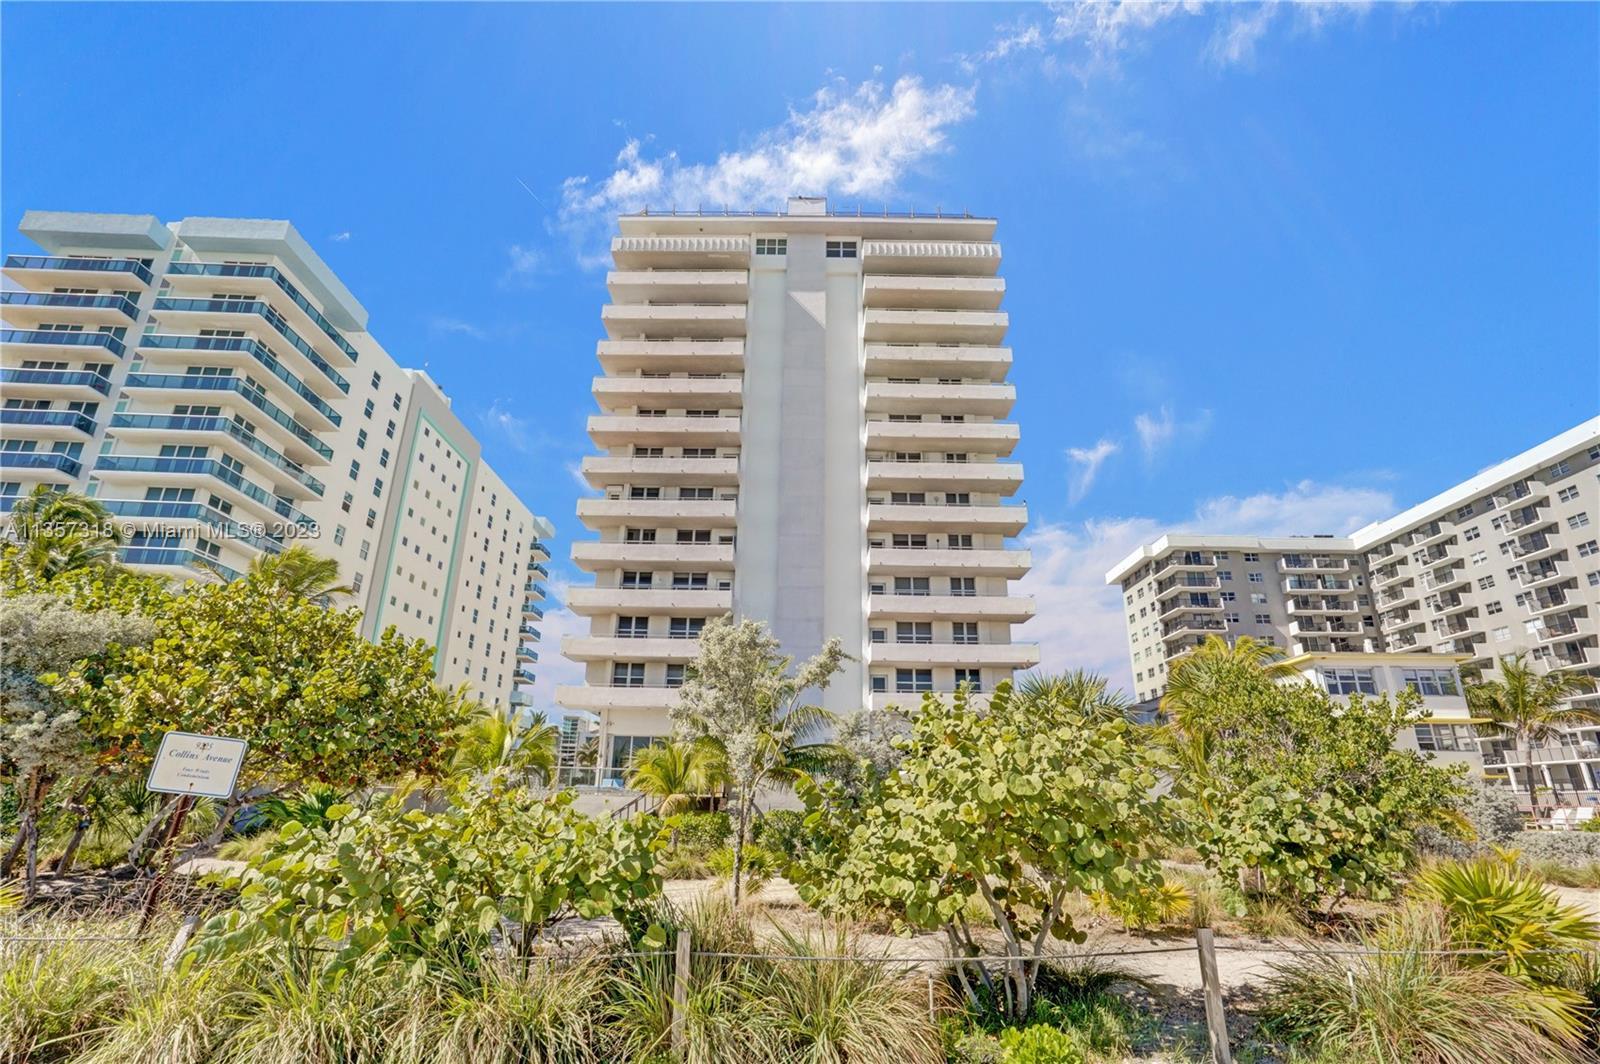 Desirable Ocean Front building in the heart of Surfside. This spacious corner 2 bed/2 bath, with 1,2